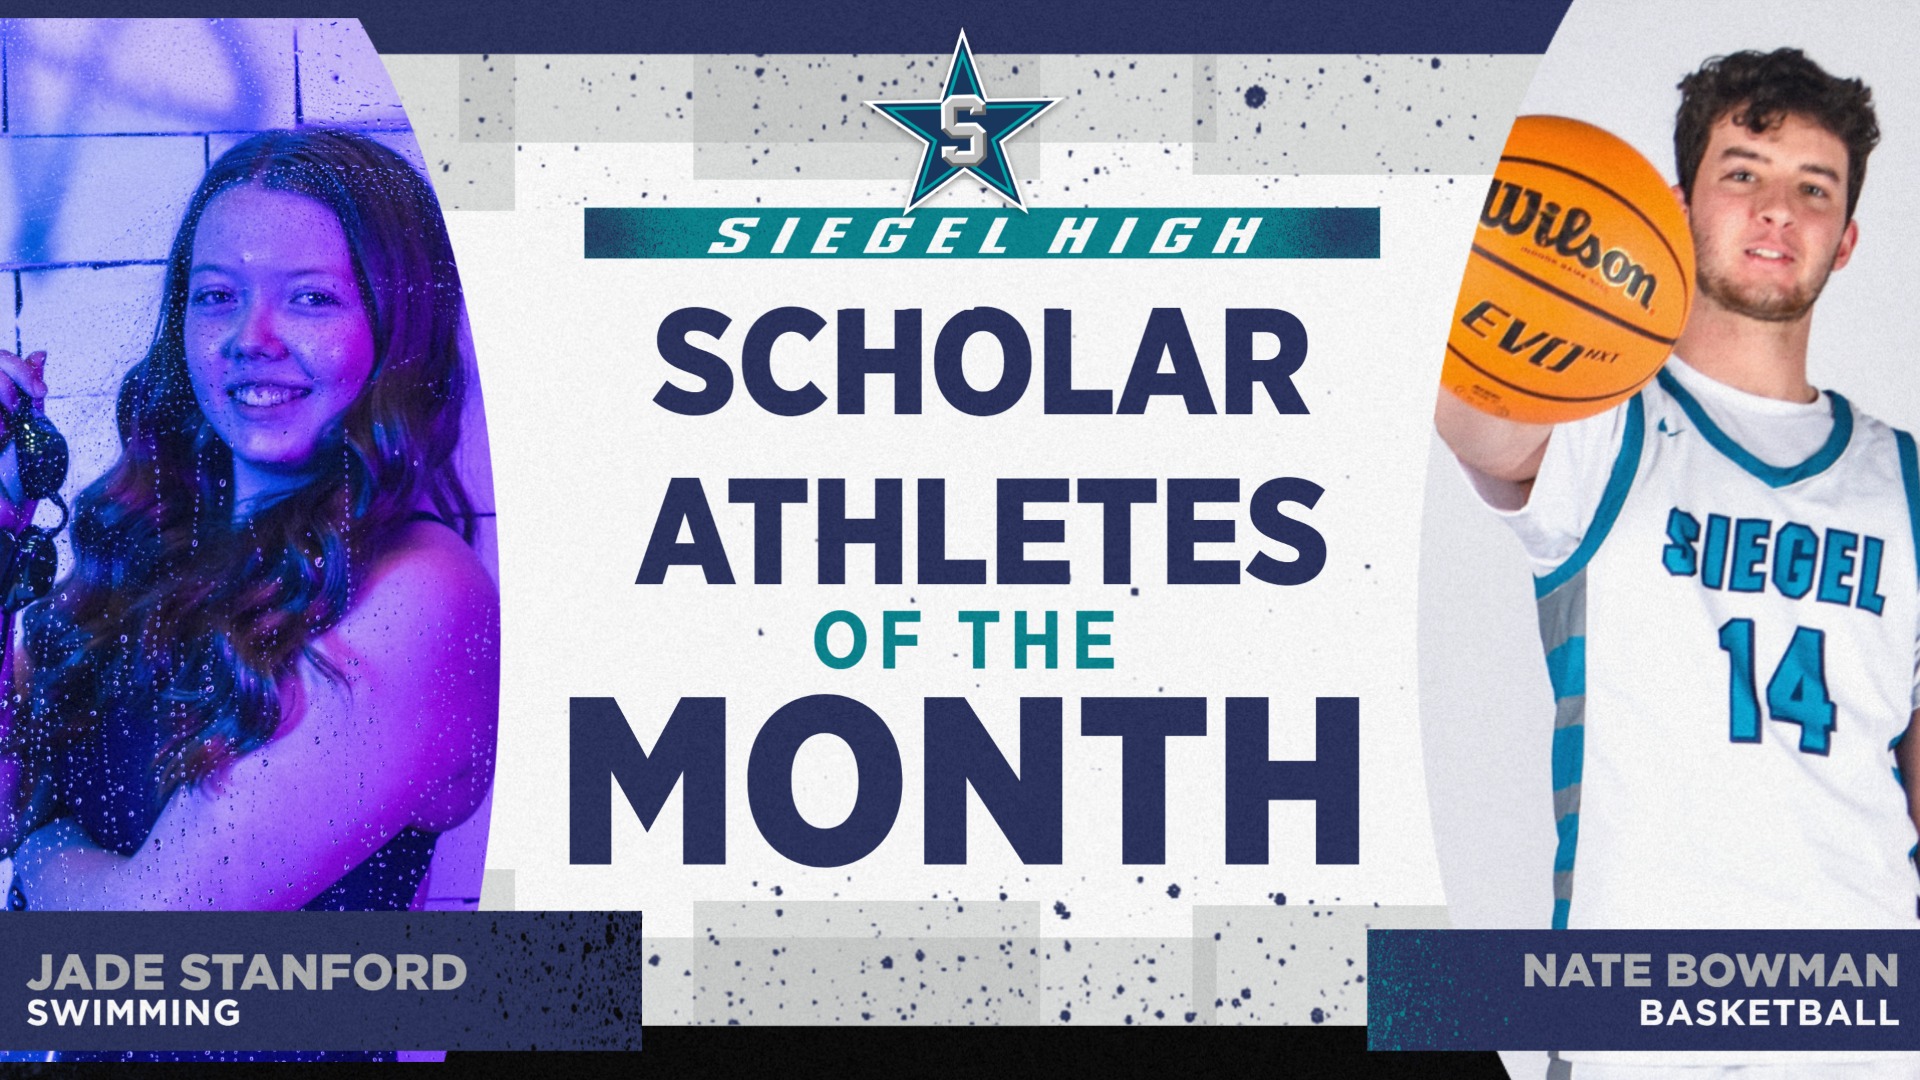 SiegelSlide 2 - Scholar Athletes of the Month - February